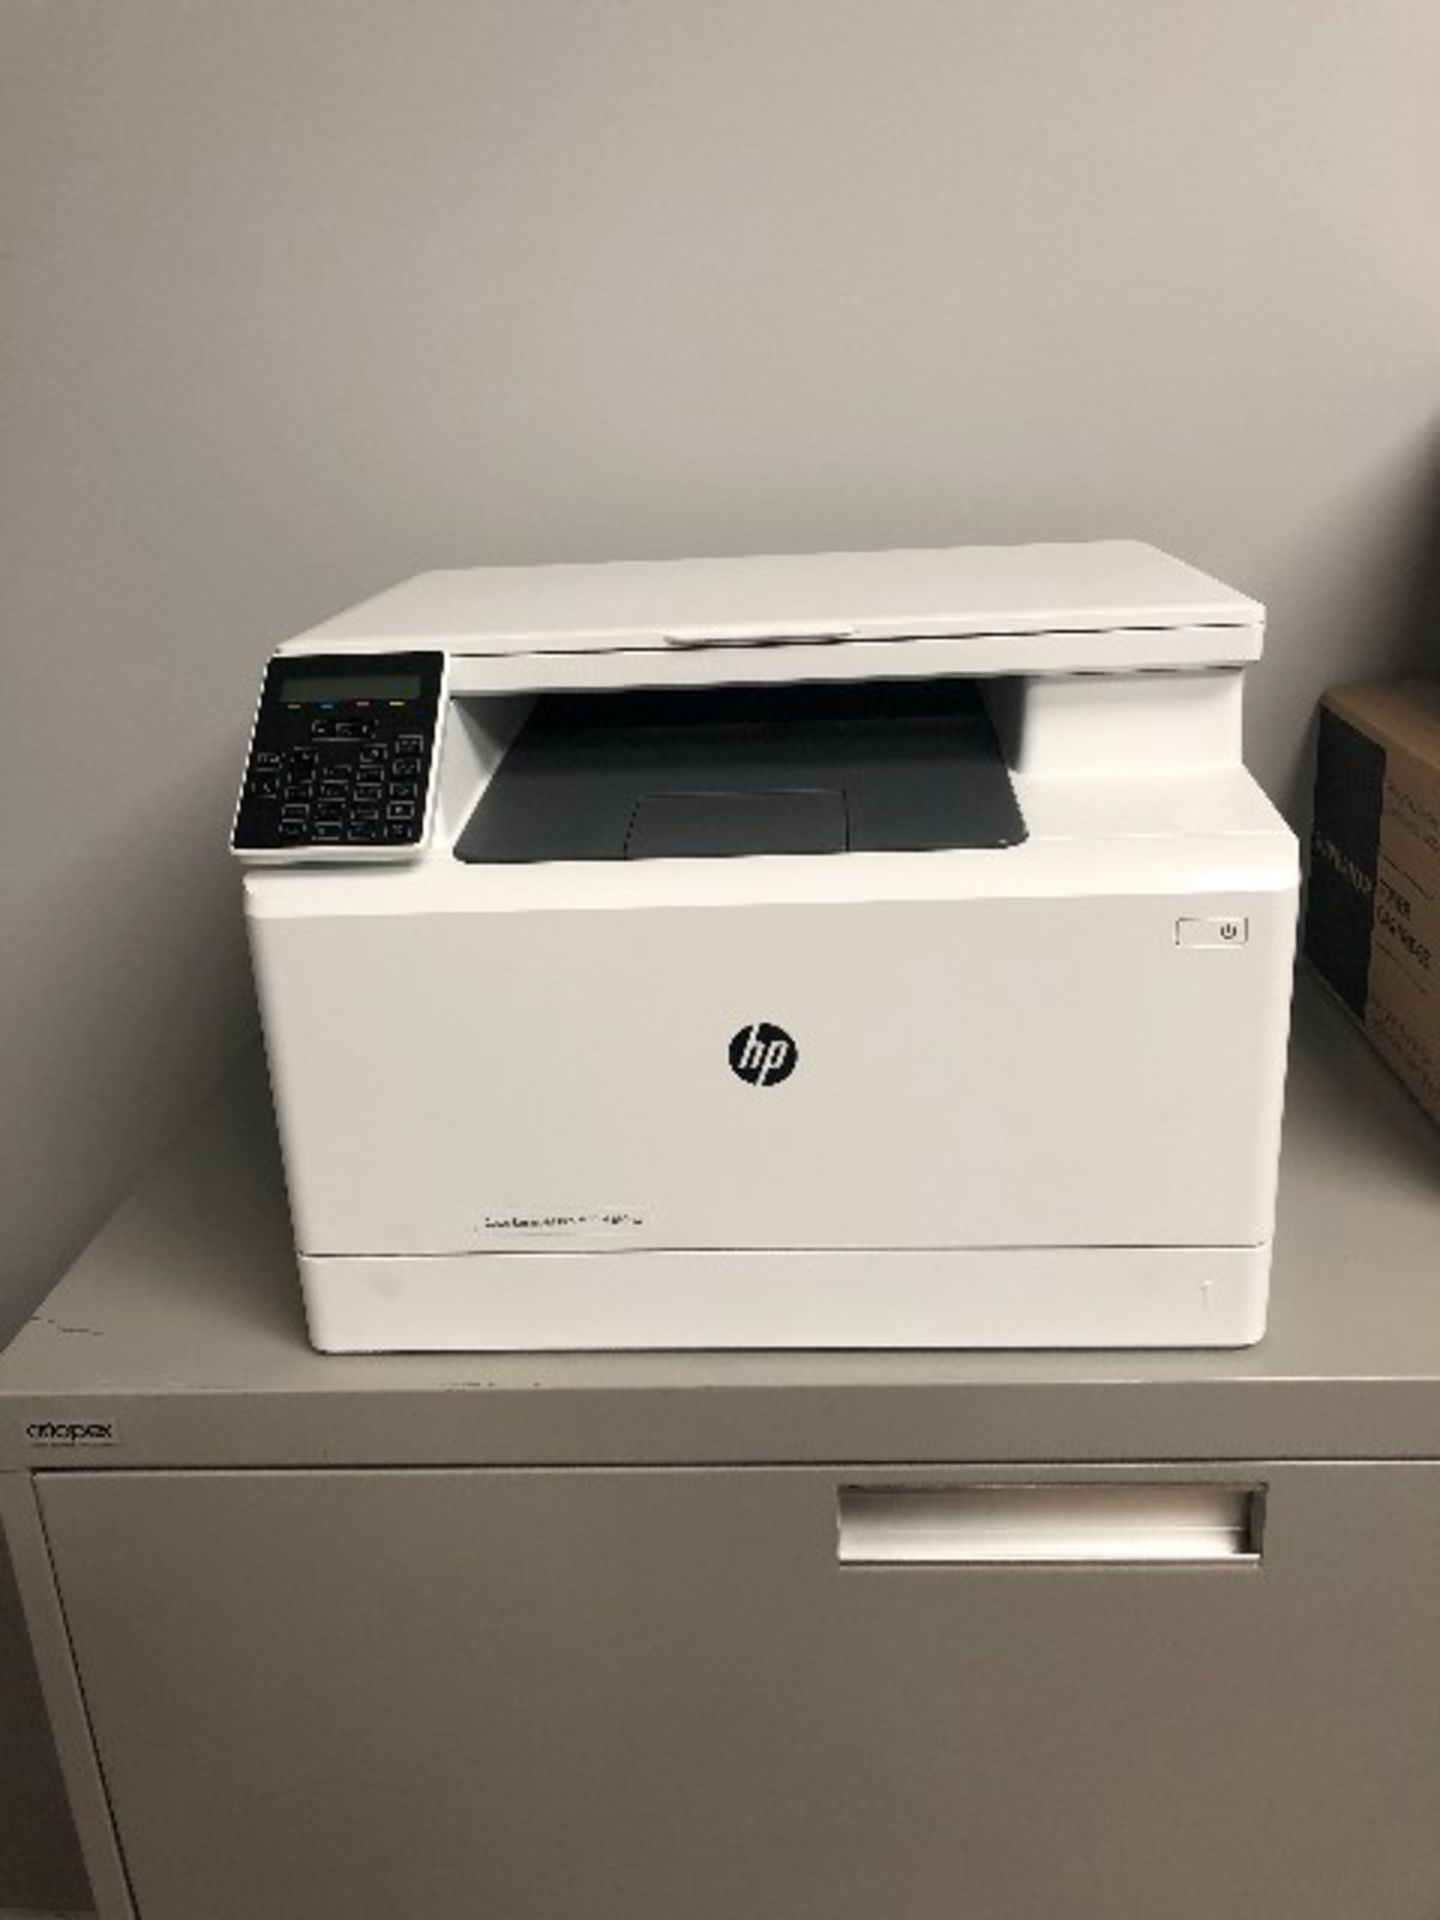 HP Color LaserJet Pro MFP M180nw all-in-one wireless color laser printer